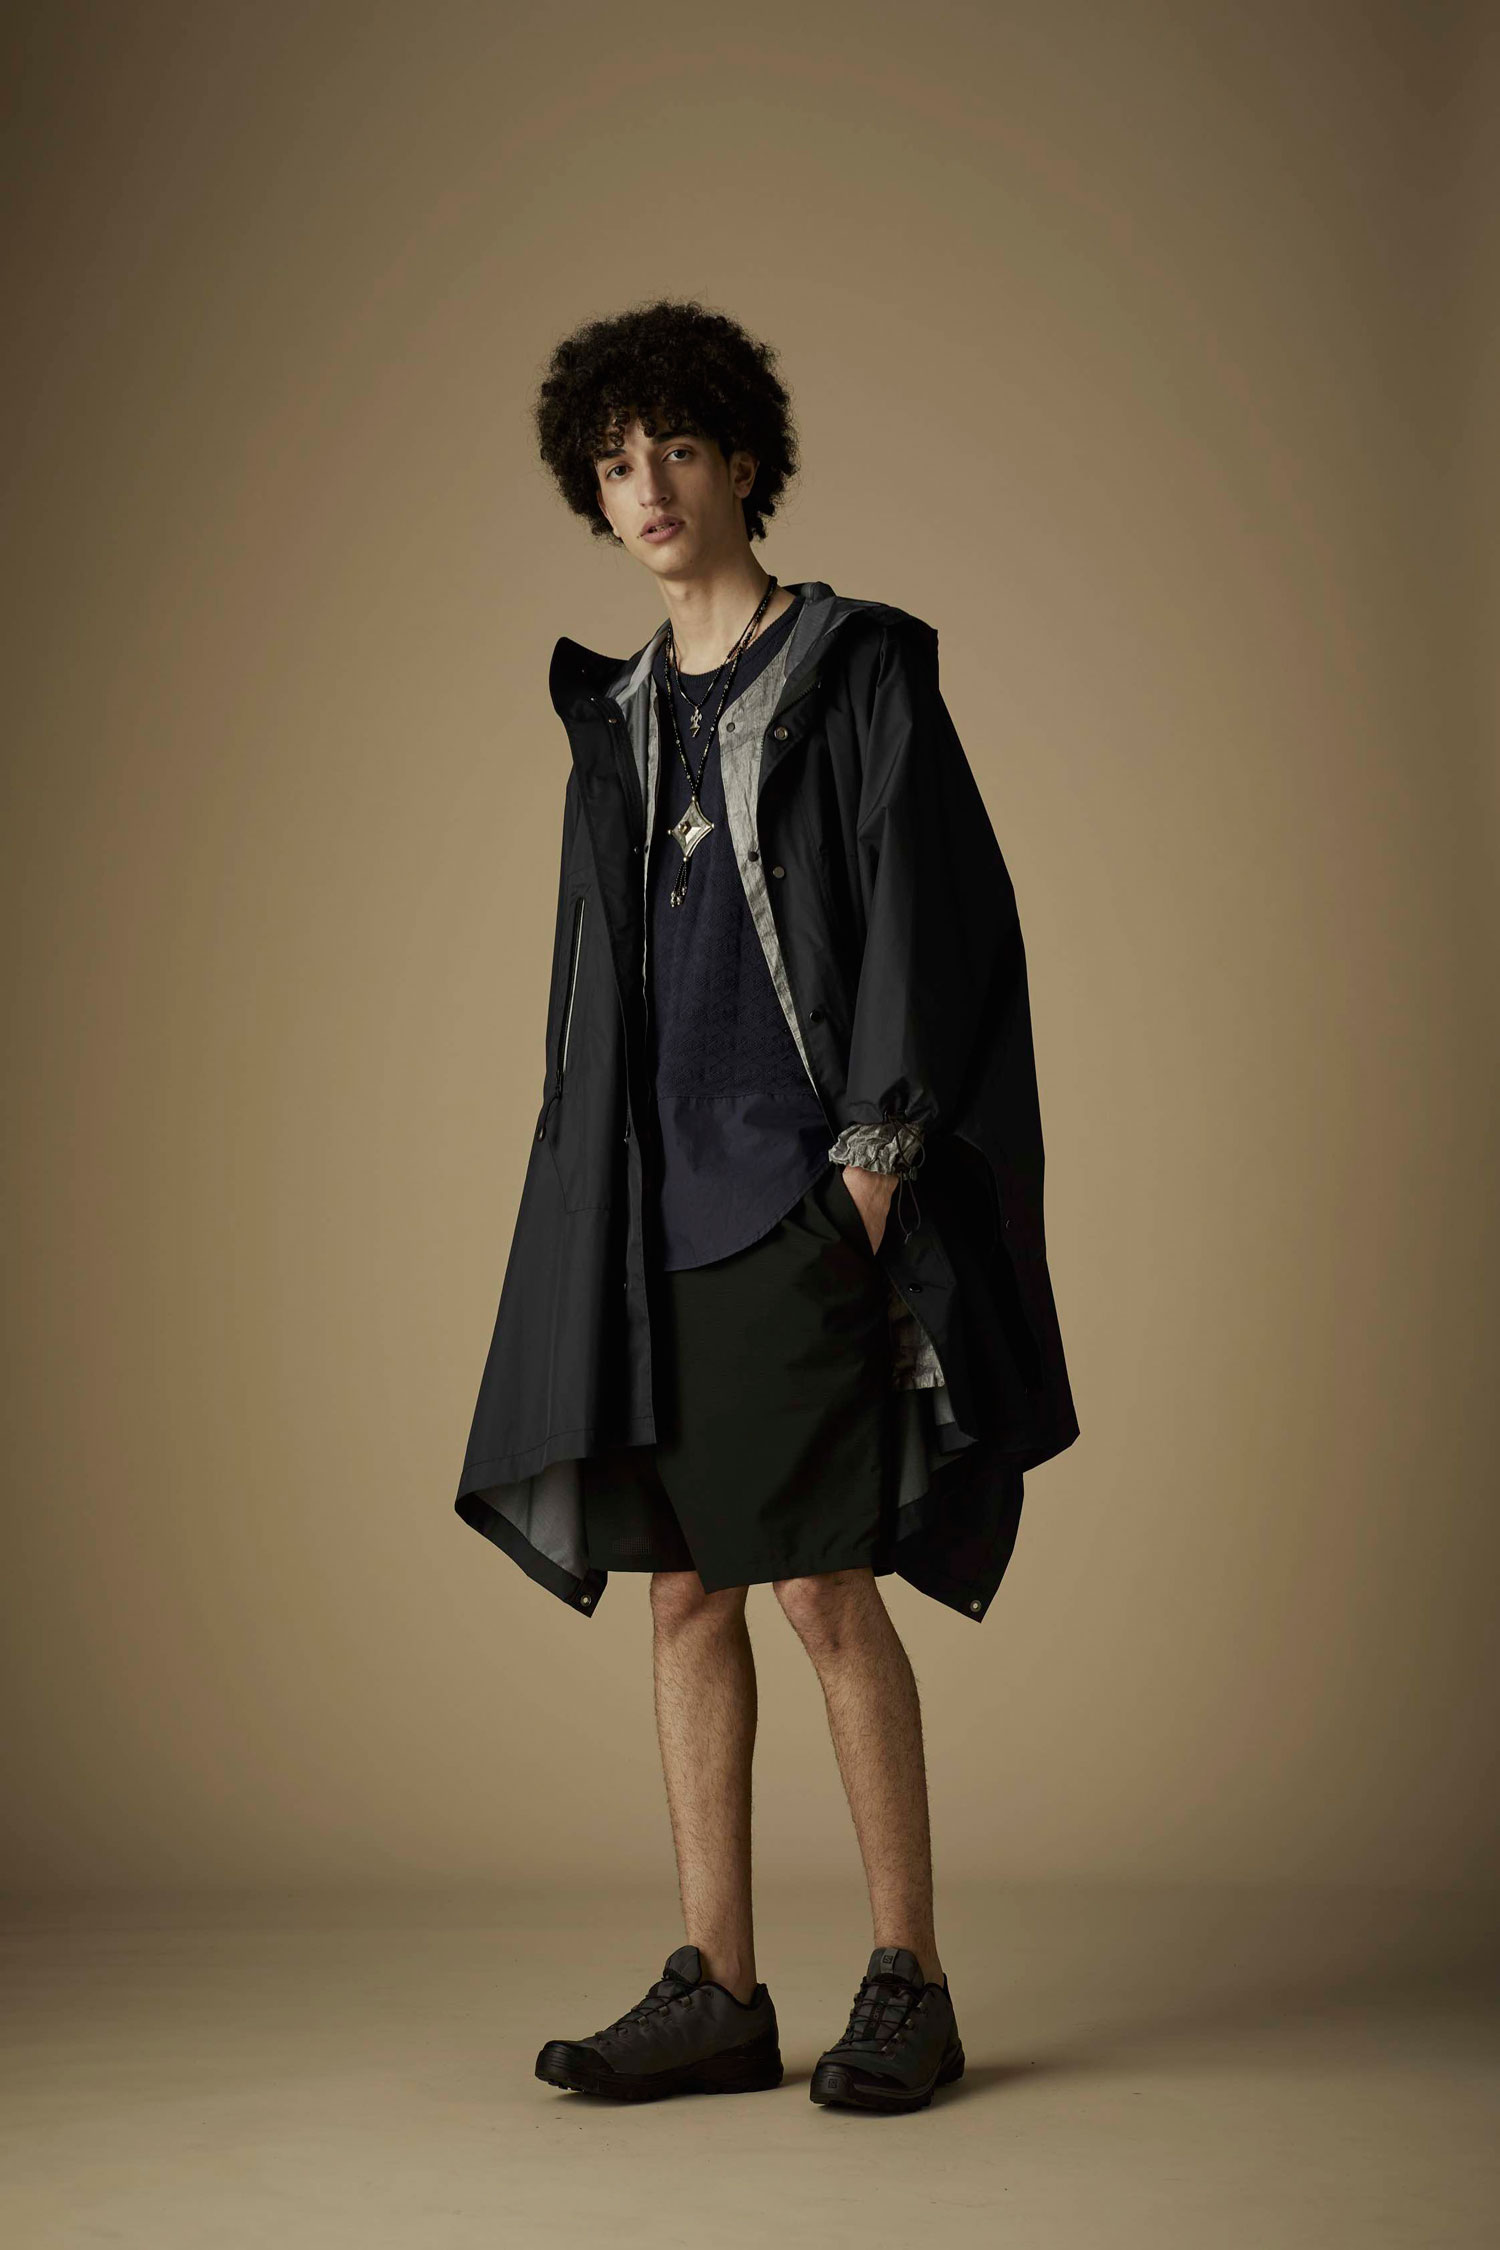 【MEN】JOHNBULL SPRING SUMMER 2019 MENS COLLECTION アイテム